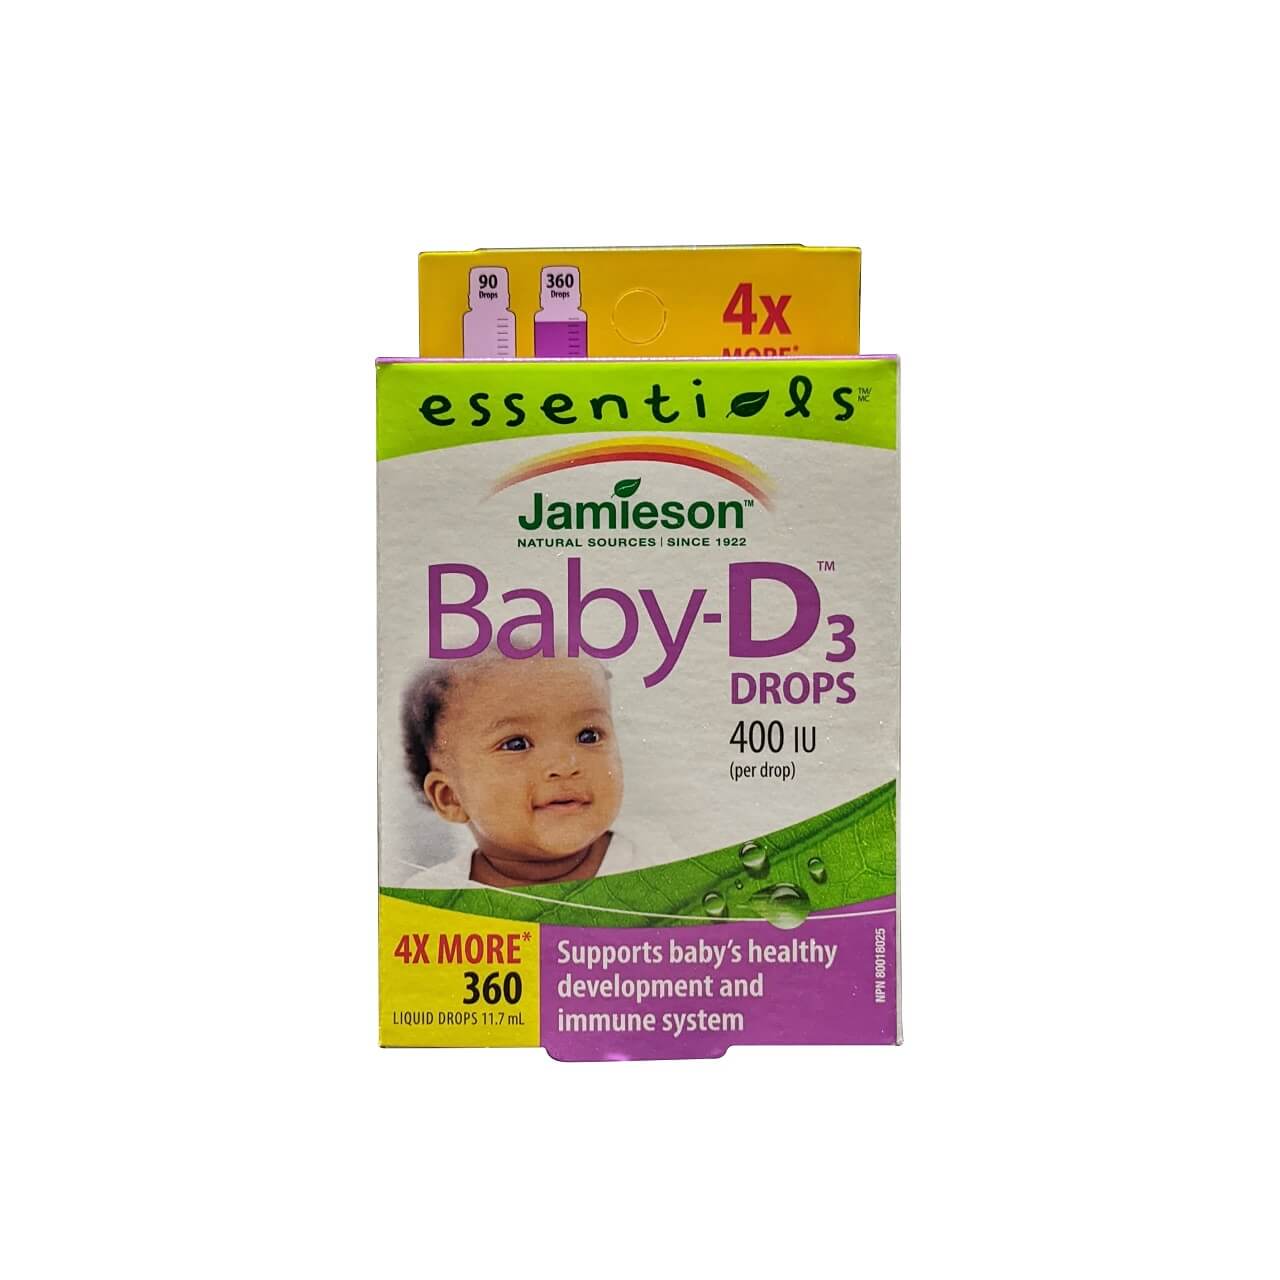 Product label for Jamieson Baby D3 Drops 400 IU (11.7 mL) in English